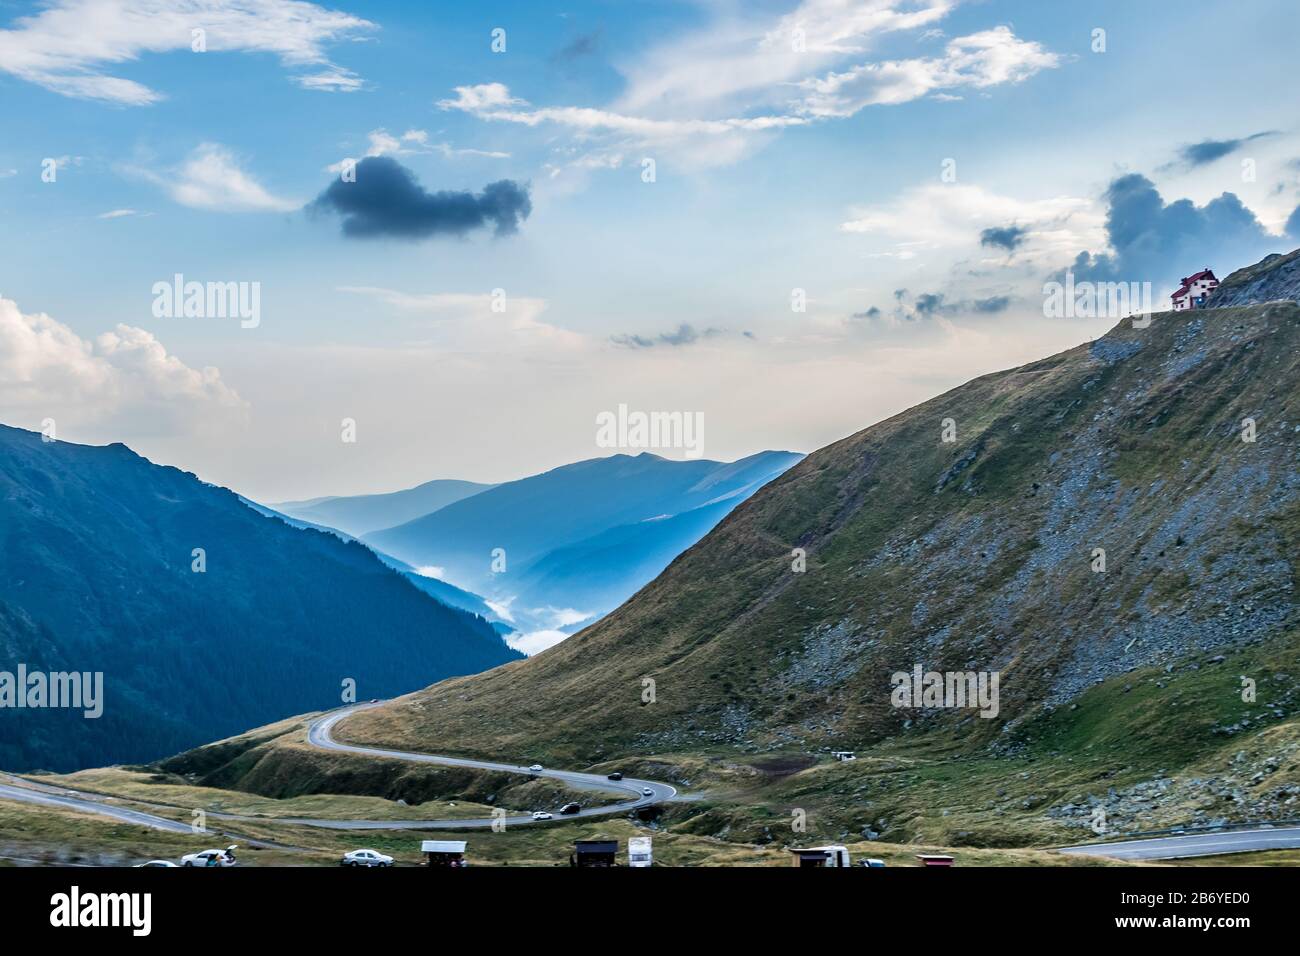 Mountain rescue house at the top of the mountain with cars passing on curvy road at the bottom and foggy forest covered mountains in the background Stock Photo